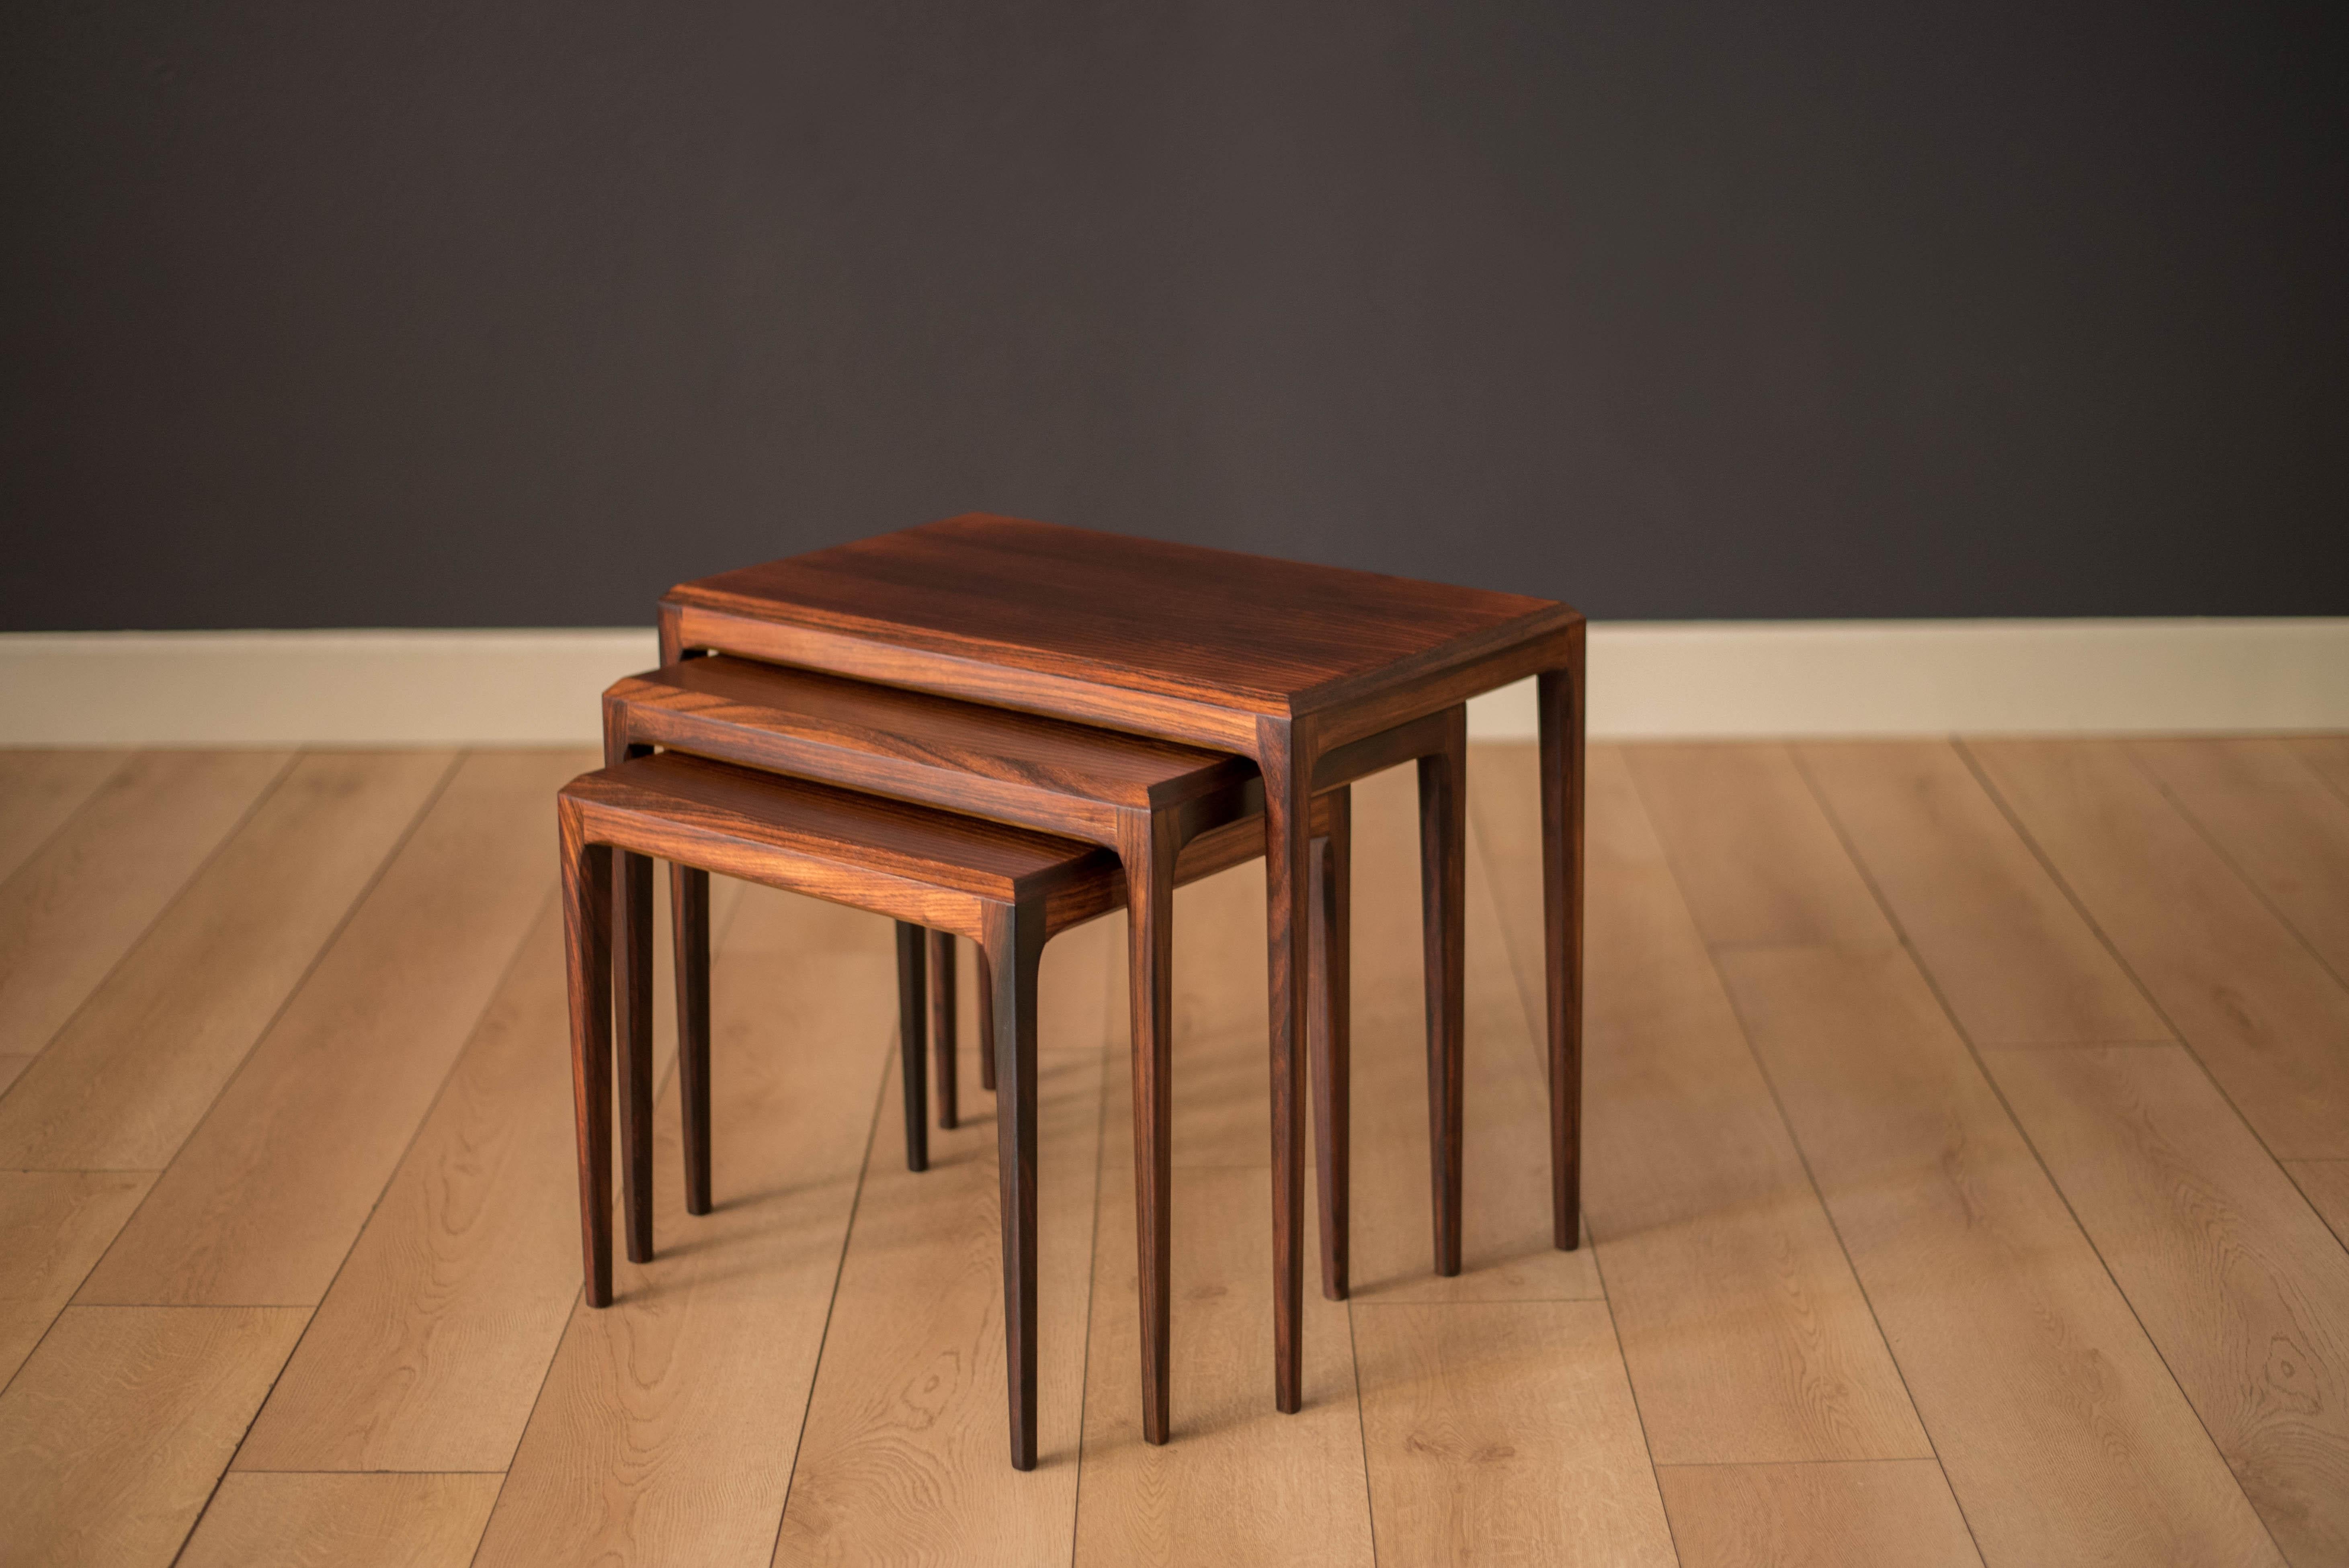 Mid-Century Modern nesting tables by Johannes Andersen for CFC Silkeborg made in Denmark. This versatile set features Brazilian rosewood with contoured edges and tapered legs.

Largest end table: 23.75